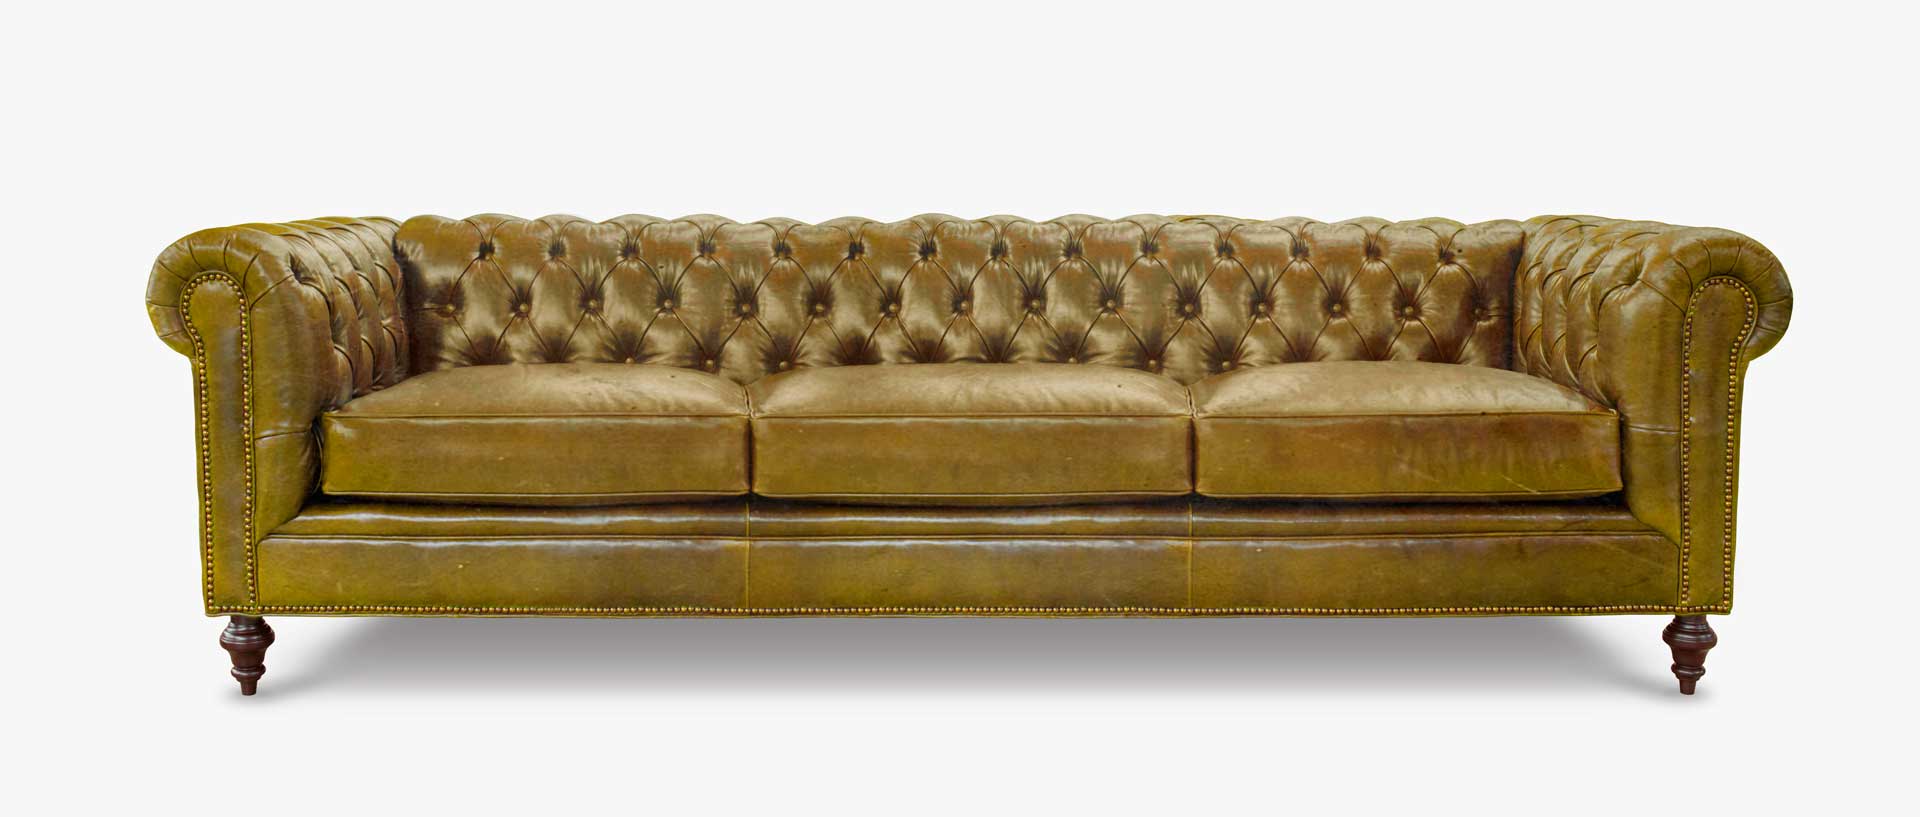 Fitzgerald Leather Vintage Chesterfield Sofa